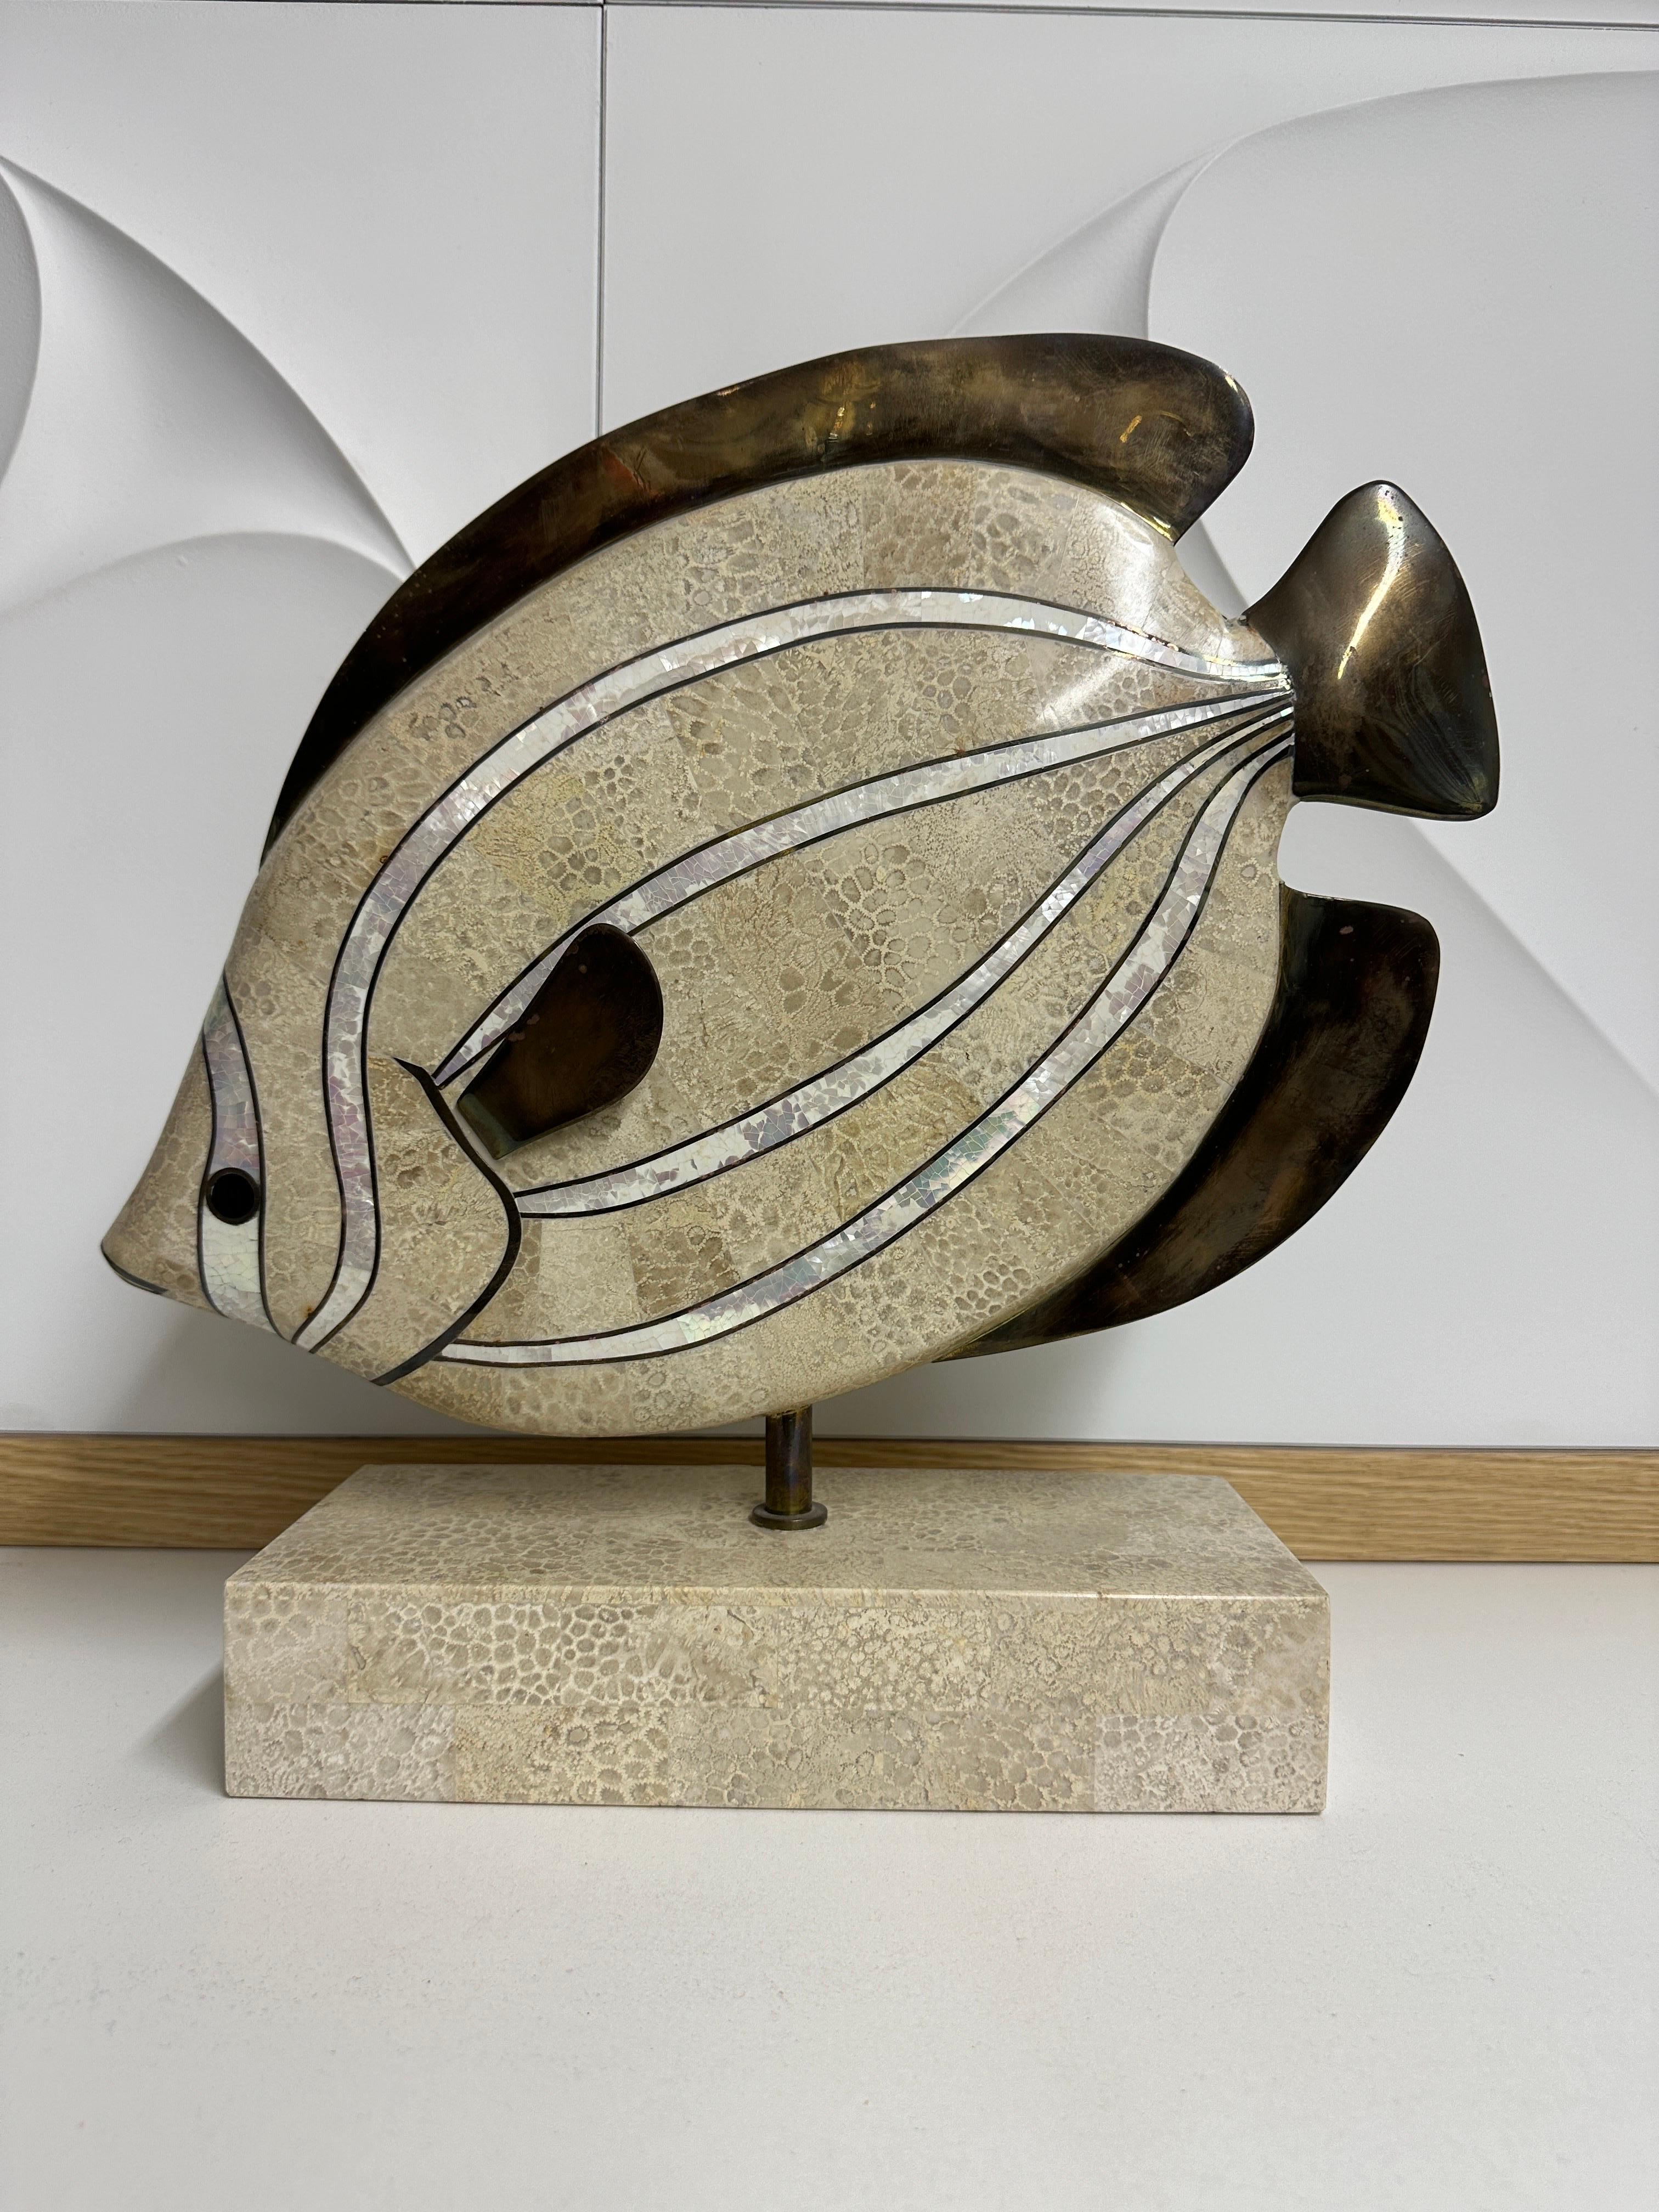 Maitland Smith tessellated fossil coral  tropical fish sculpture bookend with brass and mother of pearl details.